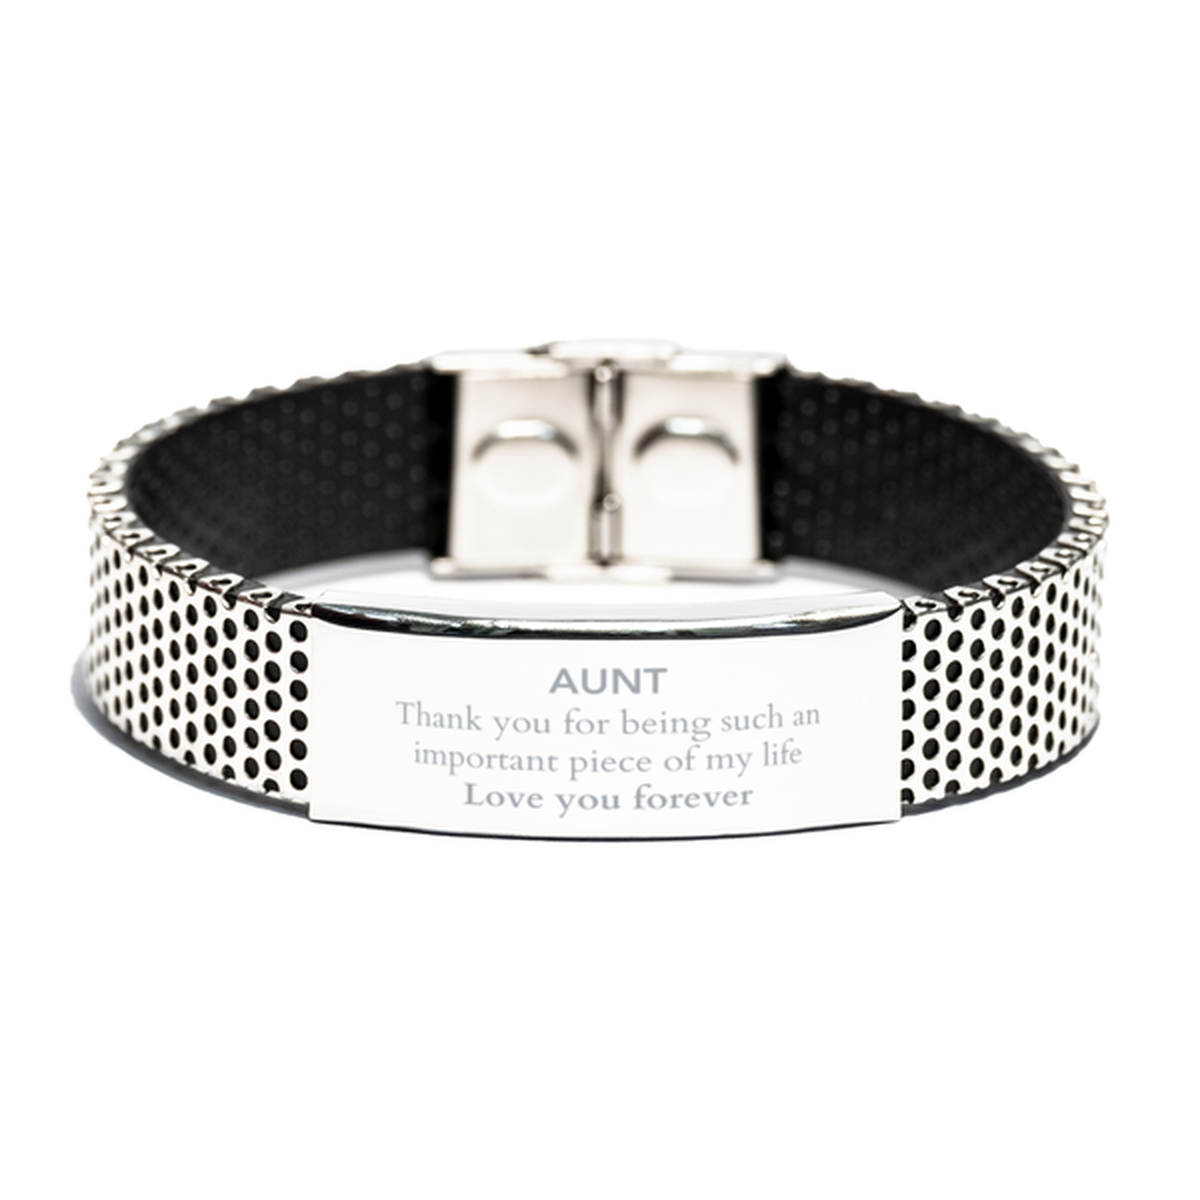 Appropriate Aunt Stainless Steel Bracelet Epic Birthday Gifts for Aunt Thank you for being such an important piece of my life Aunt Christmas Mothers Fathers Day